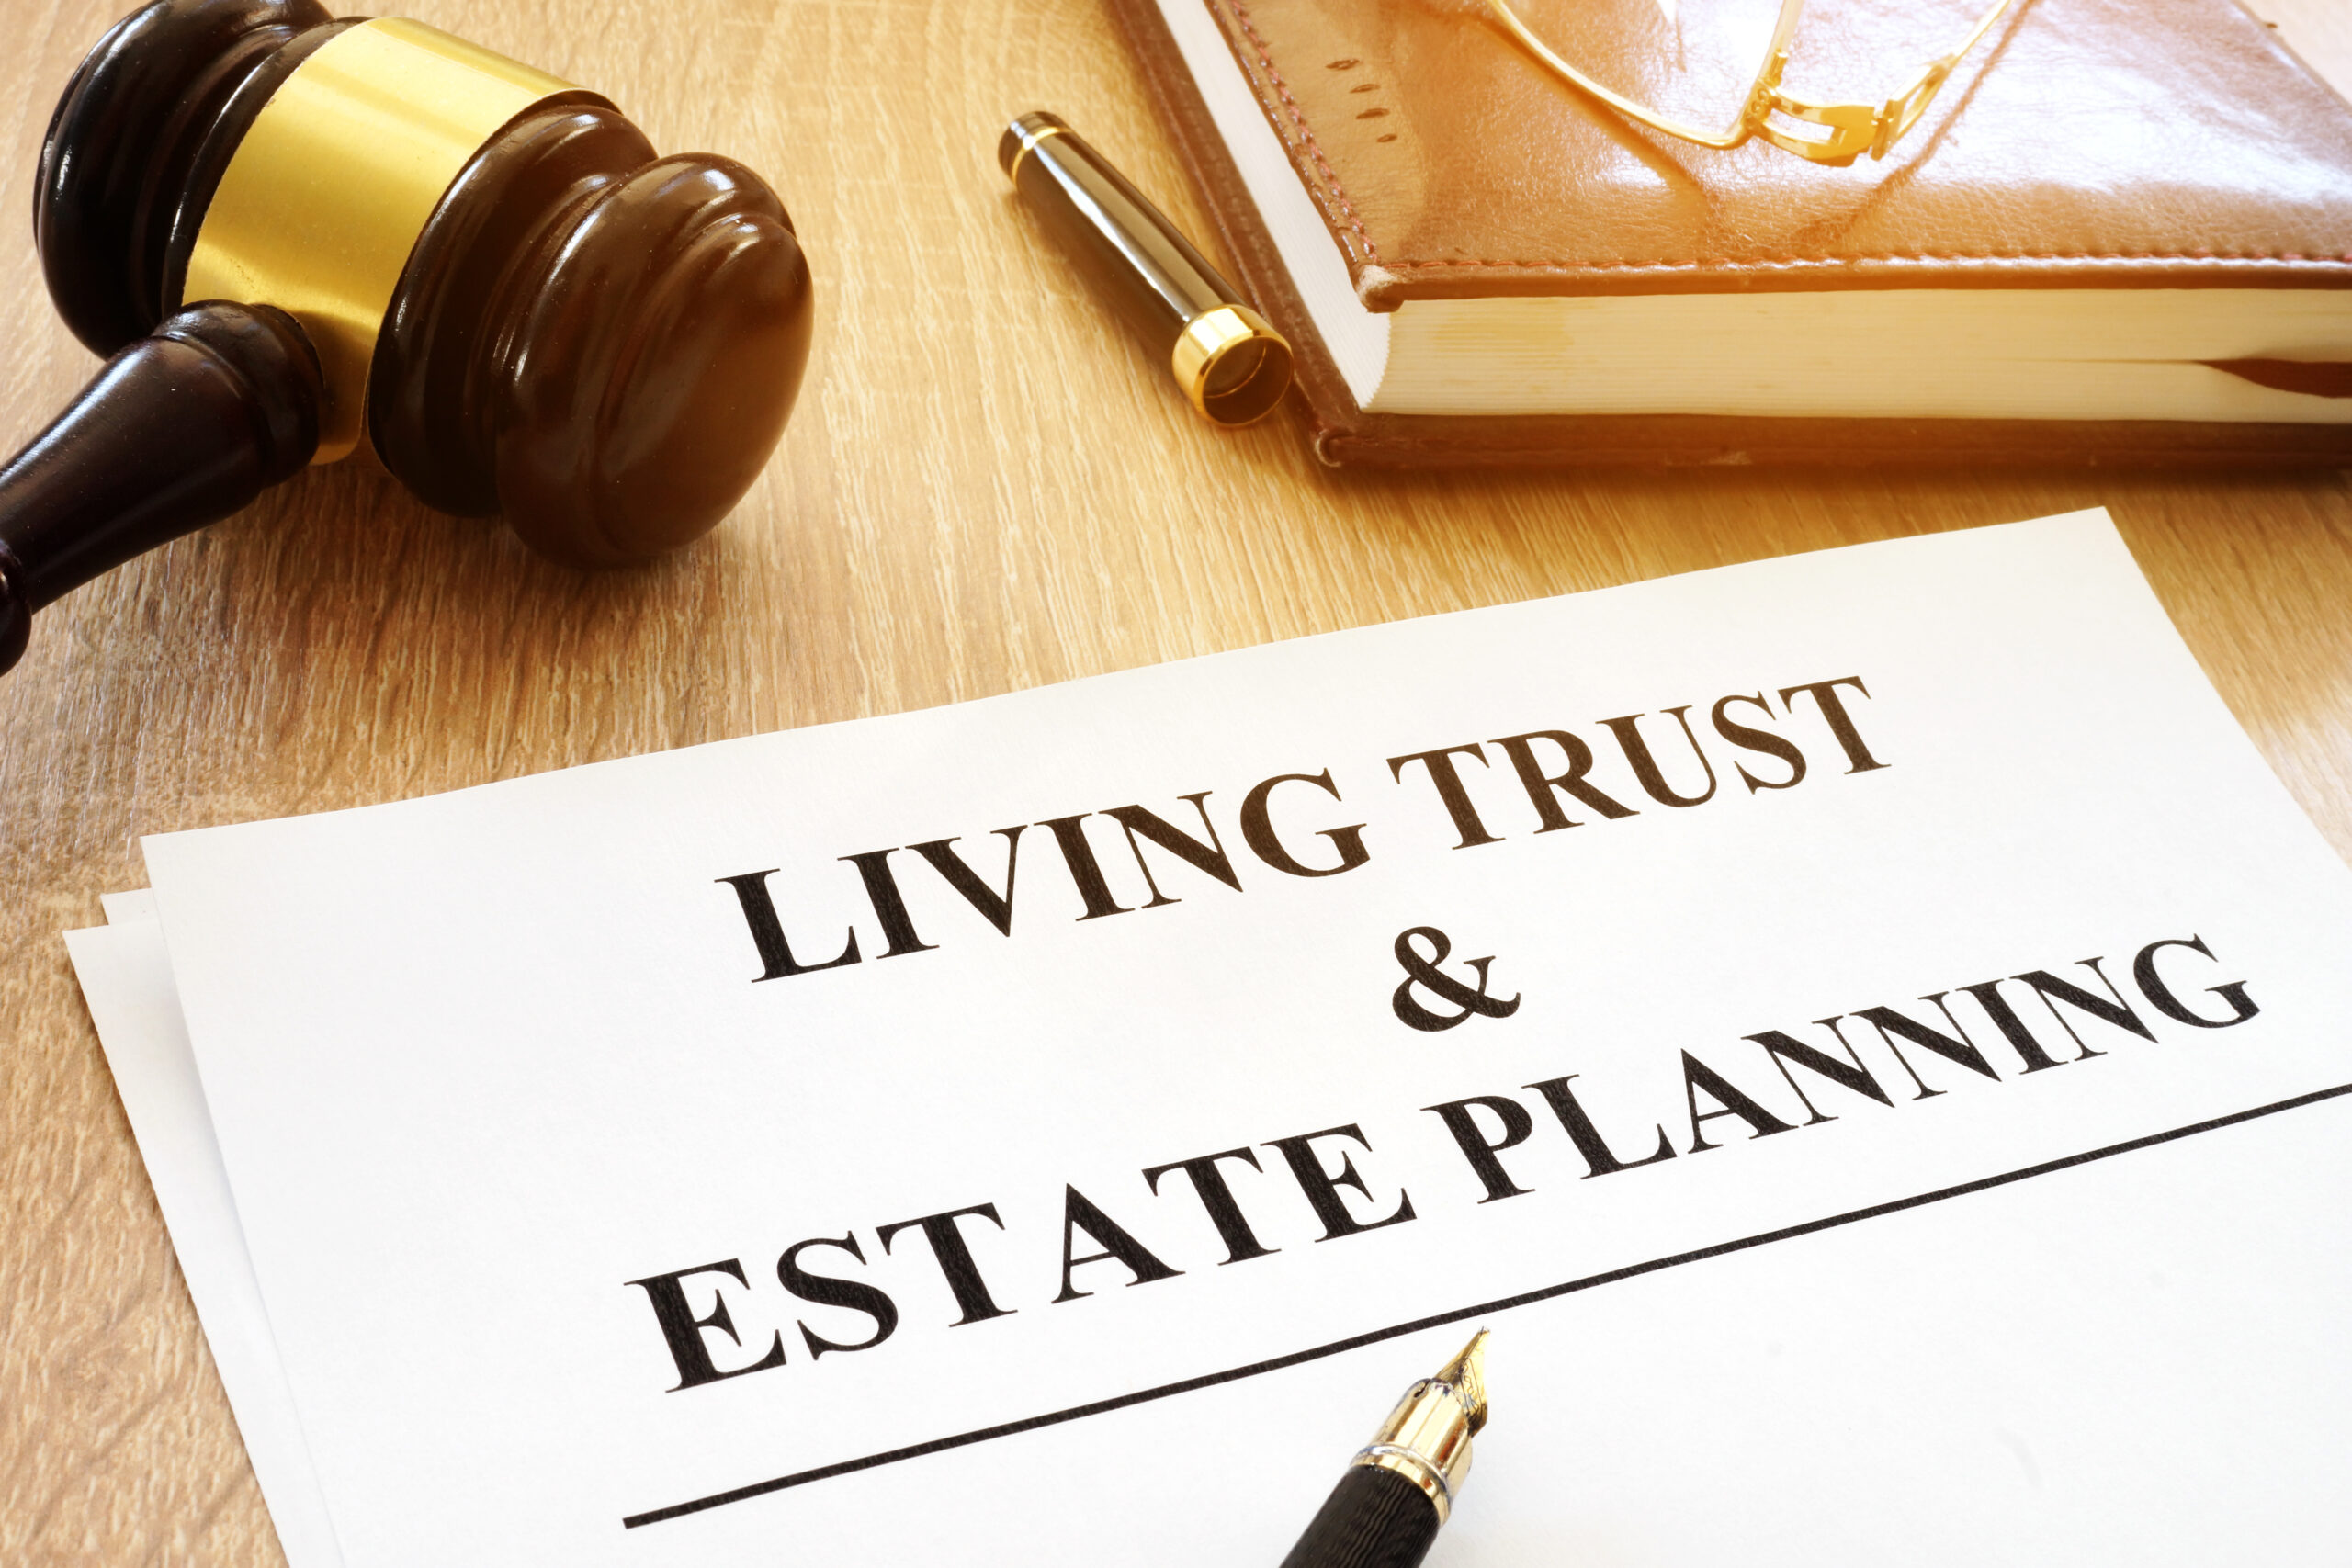 Sheet of paper that says Living Trust and Estate Planning